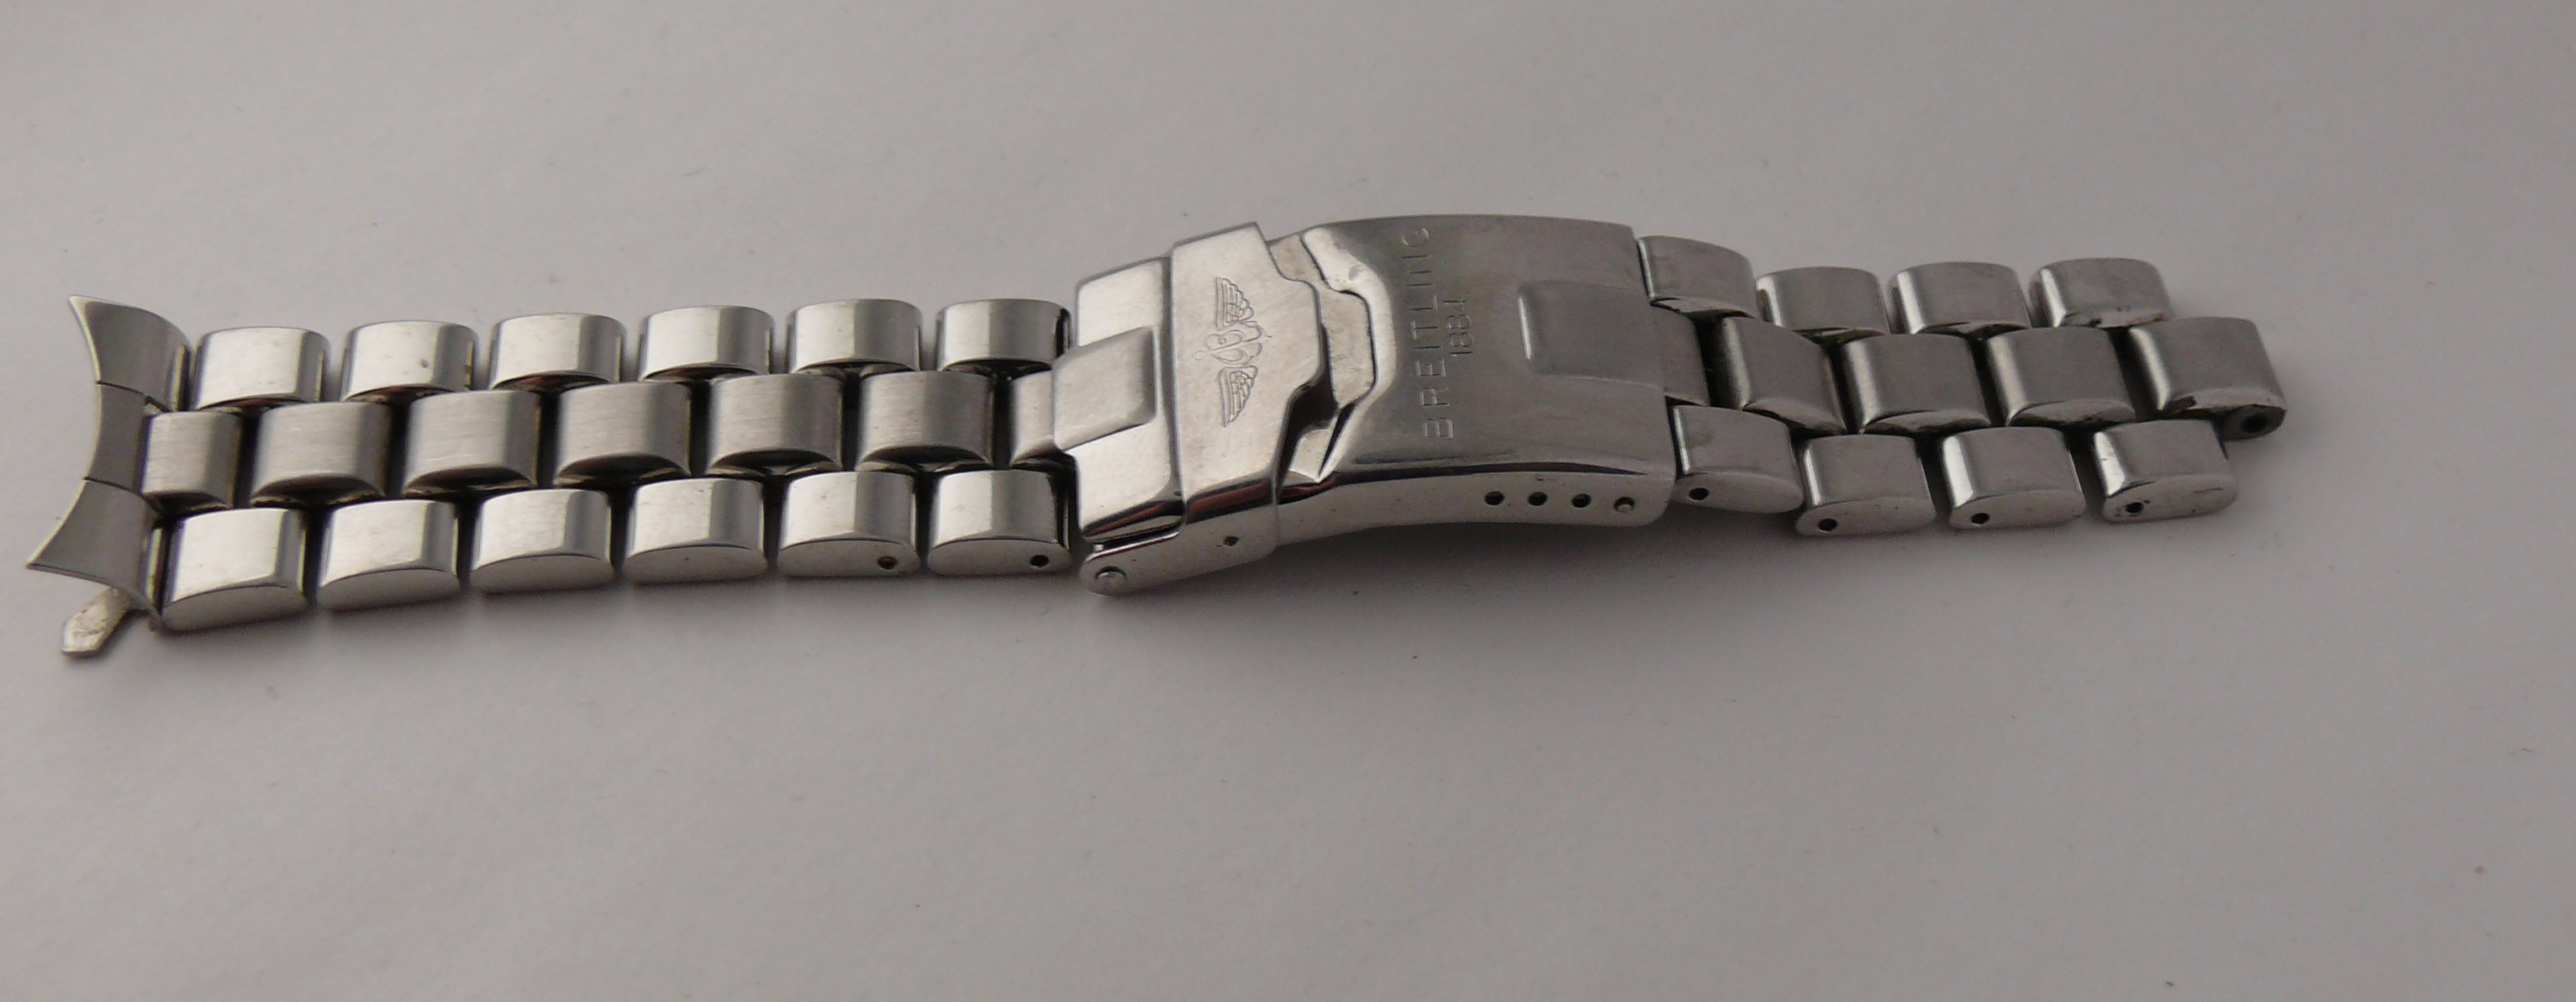 An incomplete Genuine Breitling 20mm Bracelet, with one end link marked SCA. Clasp does not lock - Image 2 of 5